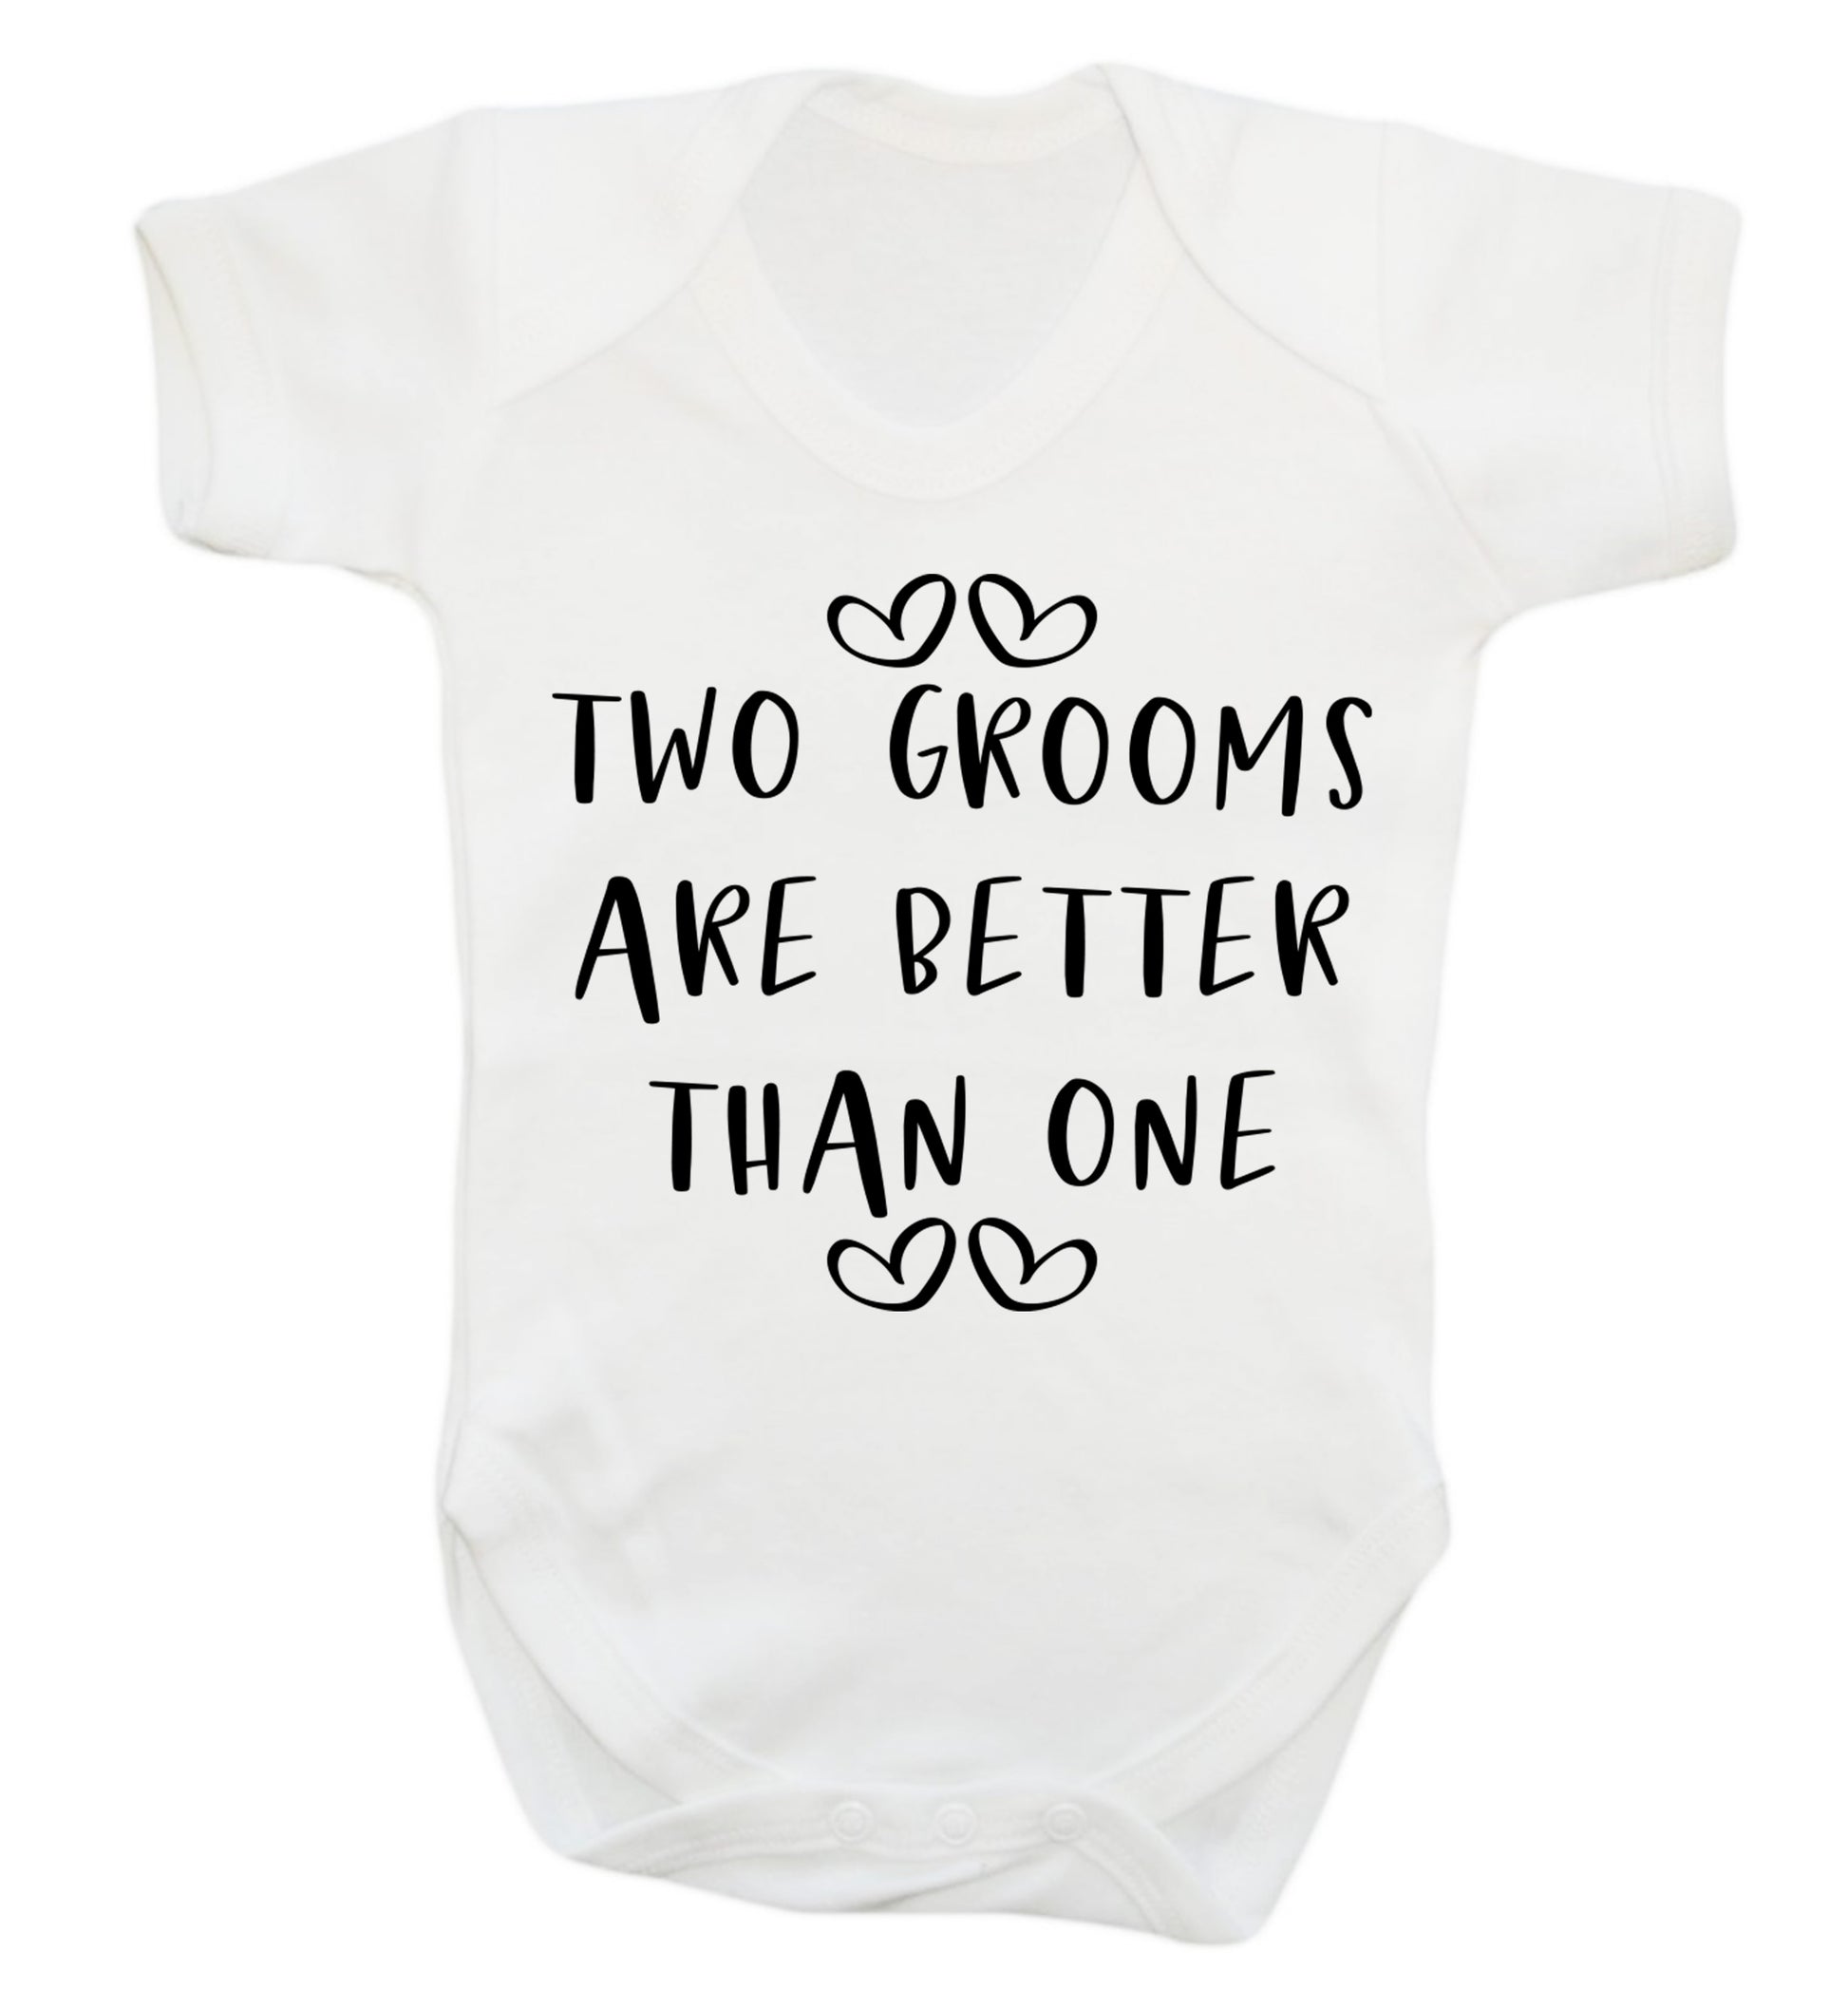 Two grooms are better than one baby vest white 18-24 months